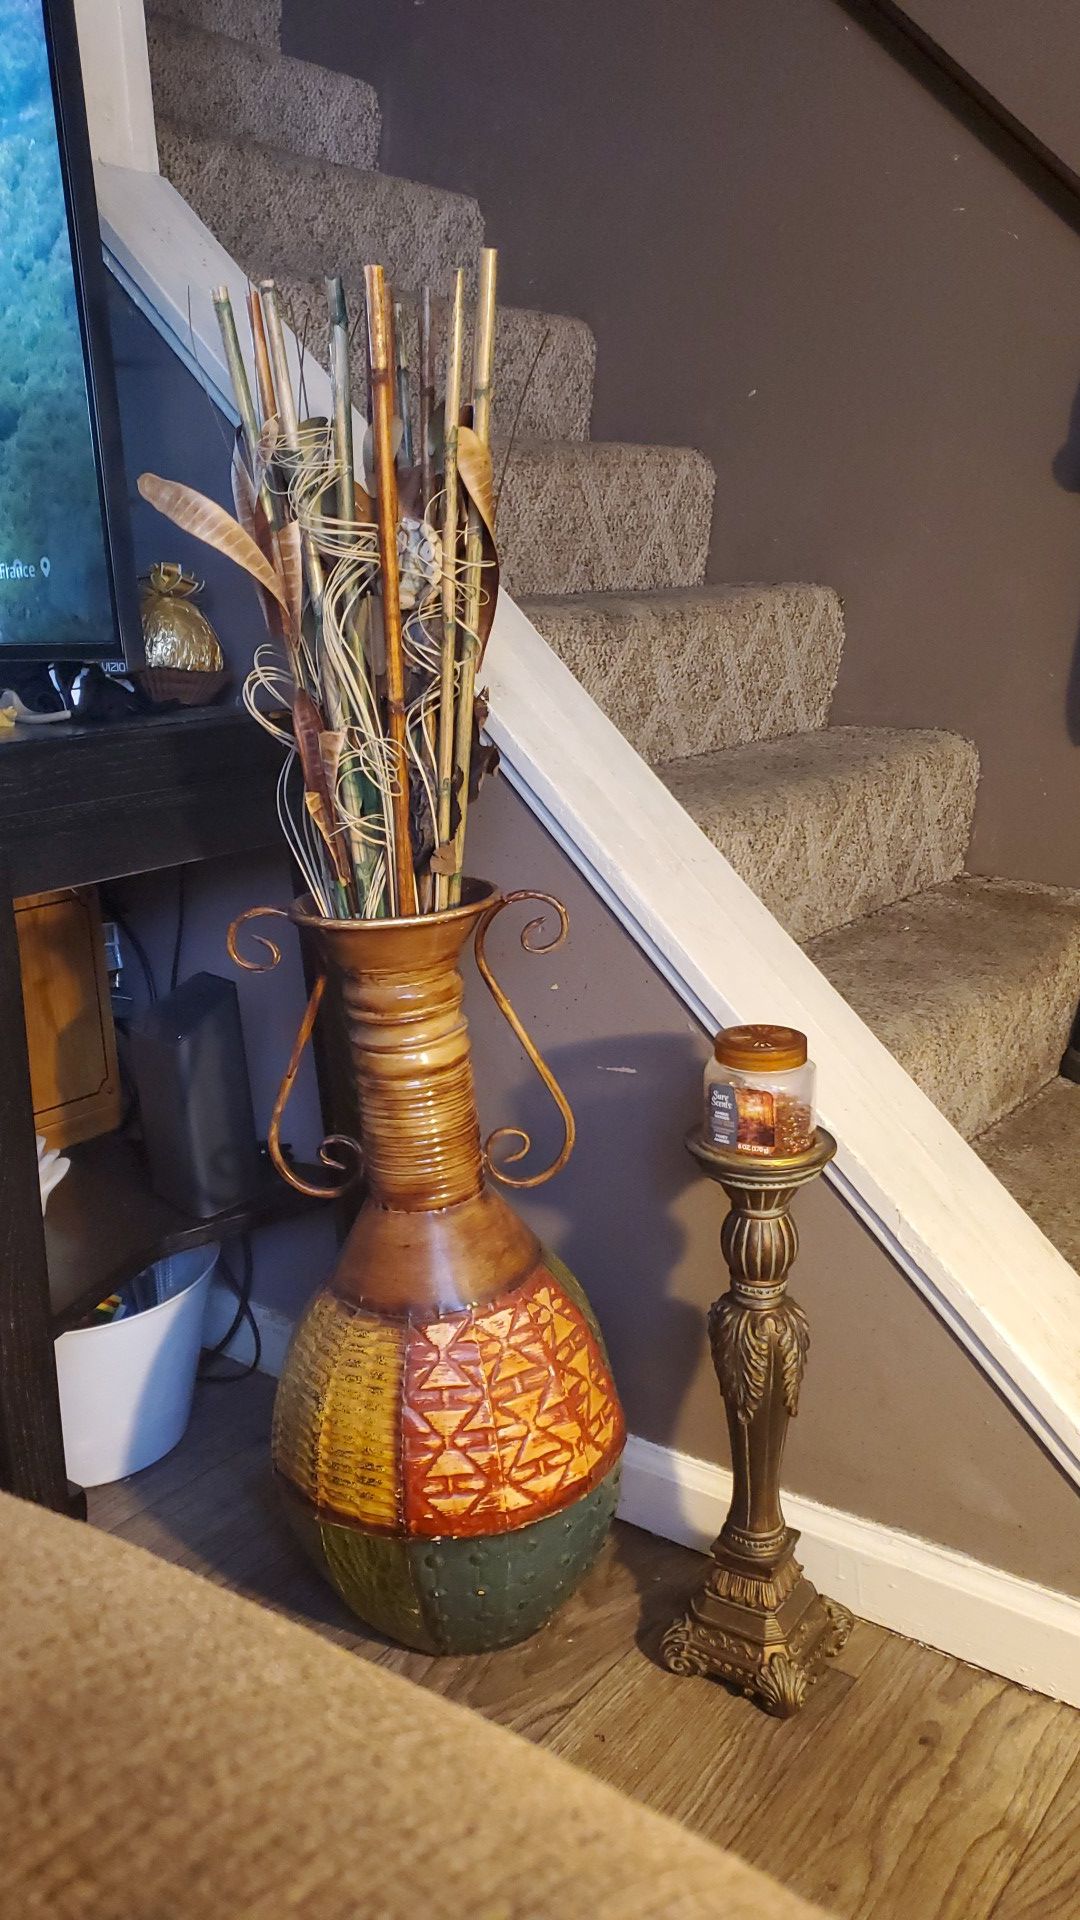 Vases with unique candle stands